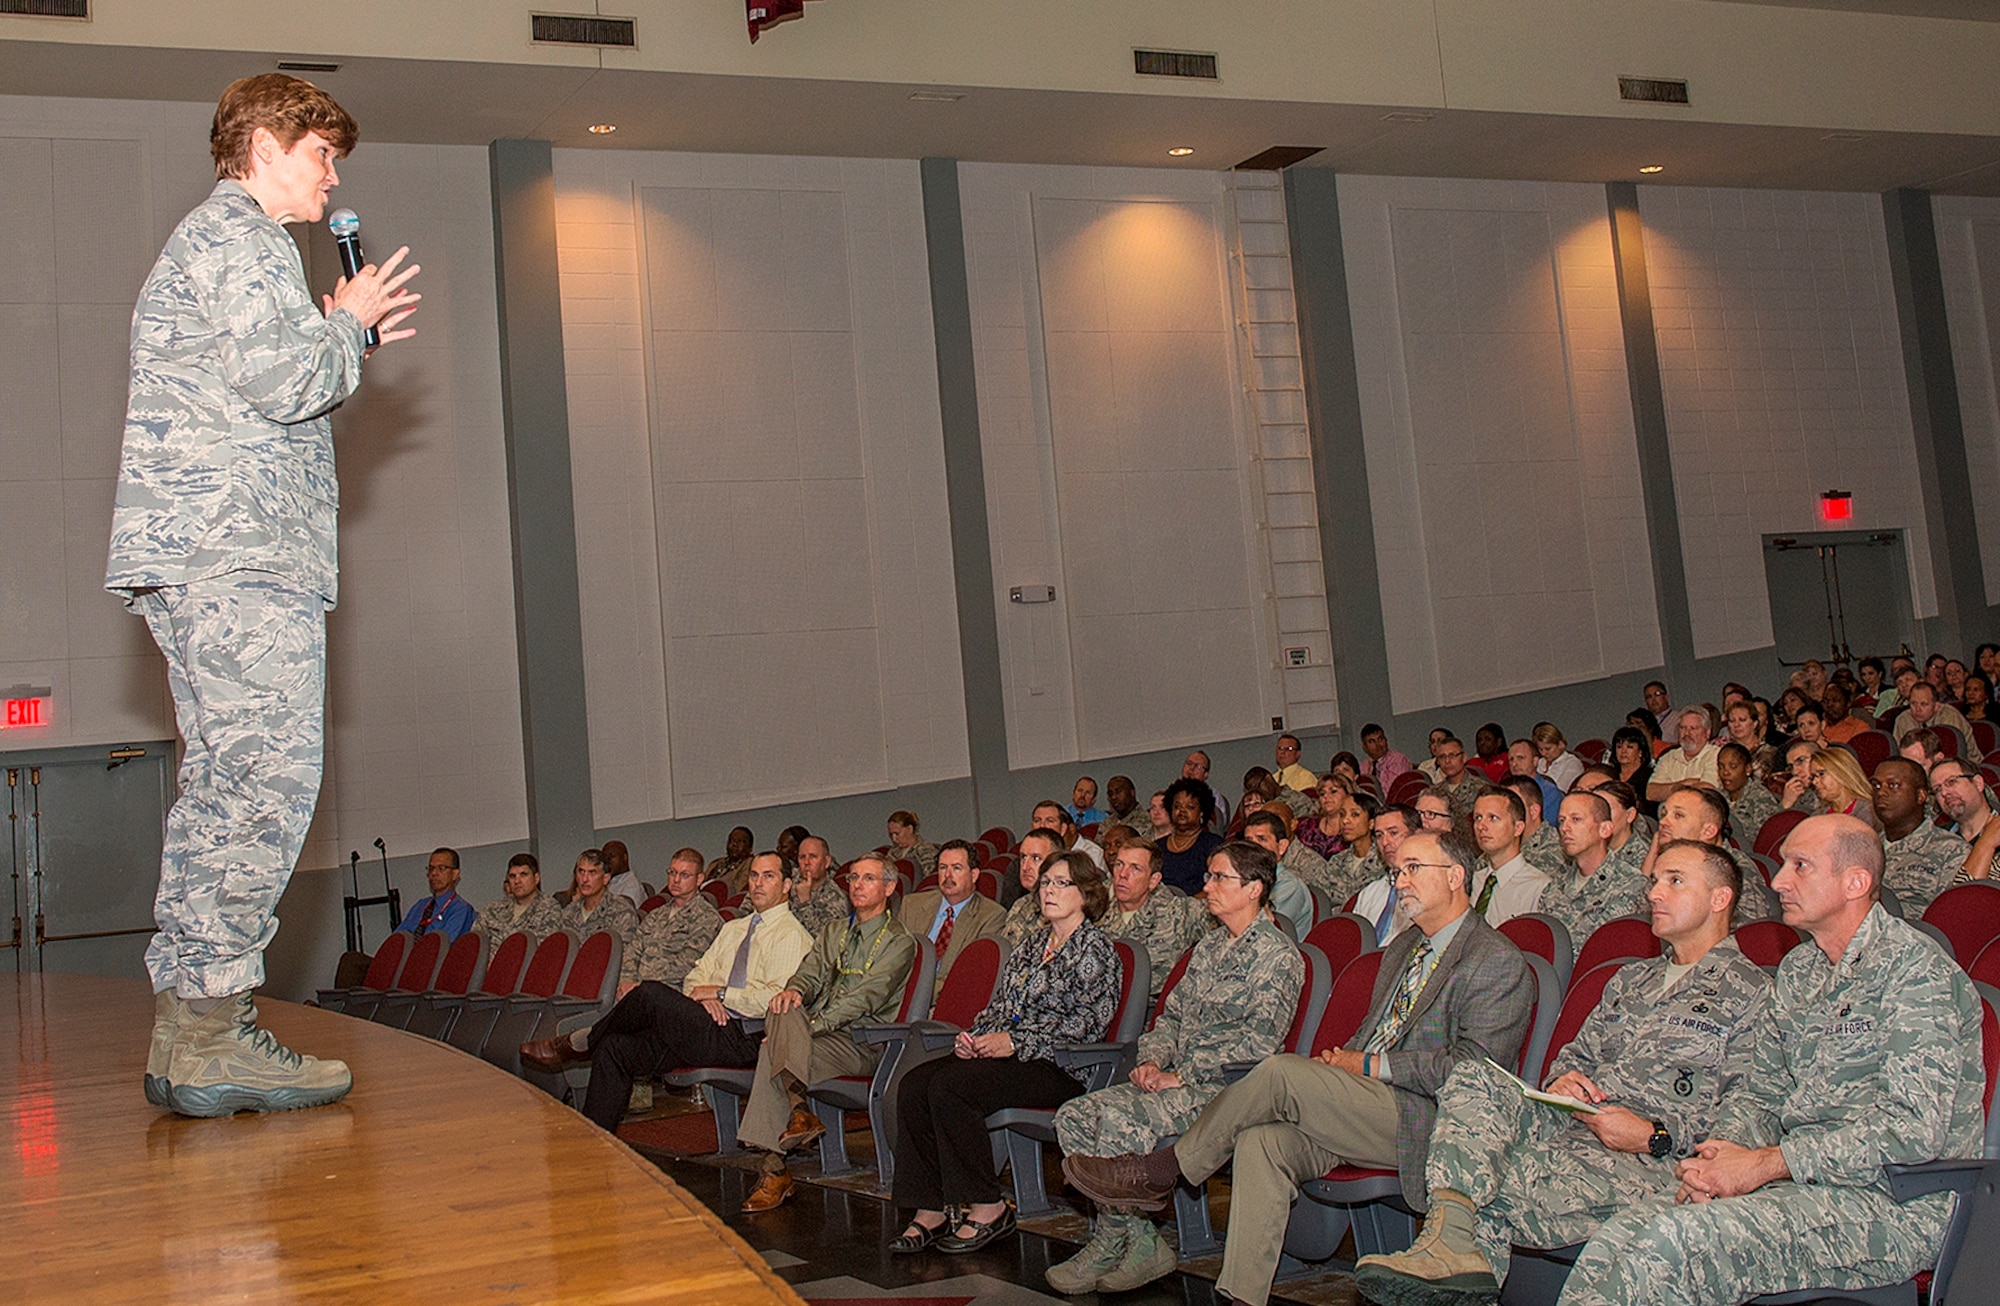 Gen. Janet Wolfenbarger, commander of Air Force Materiel Command, presents information about her command and the new Air Force Installation and Mission Support Center (Provisional) to about 400 members of the Air Force Civil Engineer Center, Air Force Security Forces Center, Air Force Materiel Command Services Directorate and local squadrons assigned to the Air Force Installation Contracting Agency Oct. 9 at a town hall meeting in the Bob Hope Theater at Joint Base San Antonio-Lackland, Tex. (U.S. Air Force photo/Benjamin Faske)